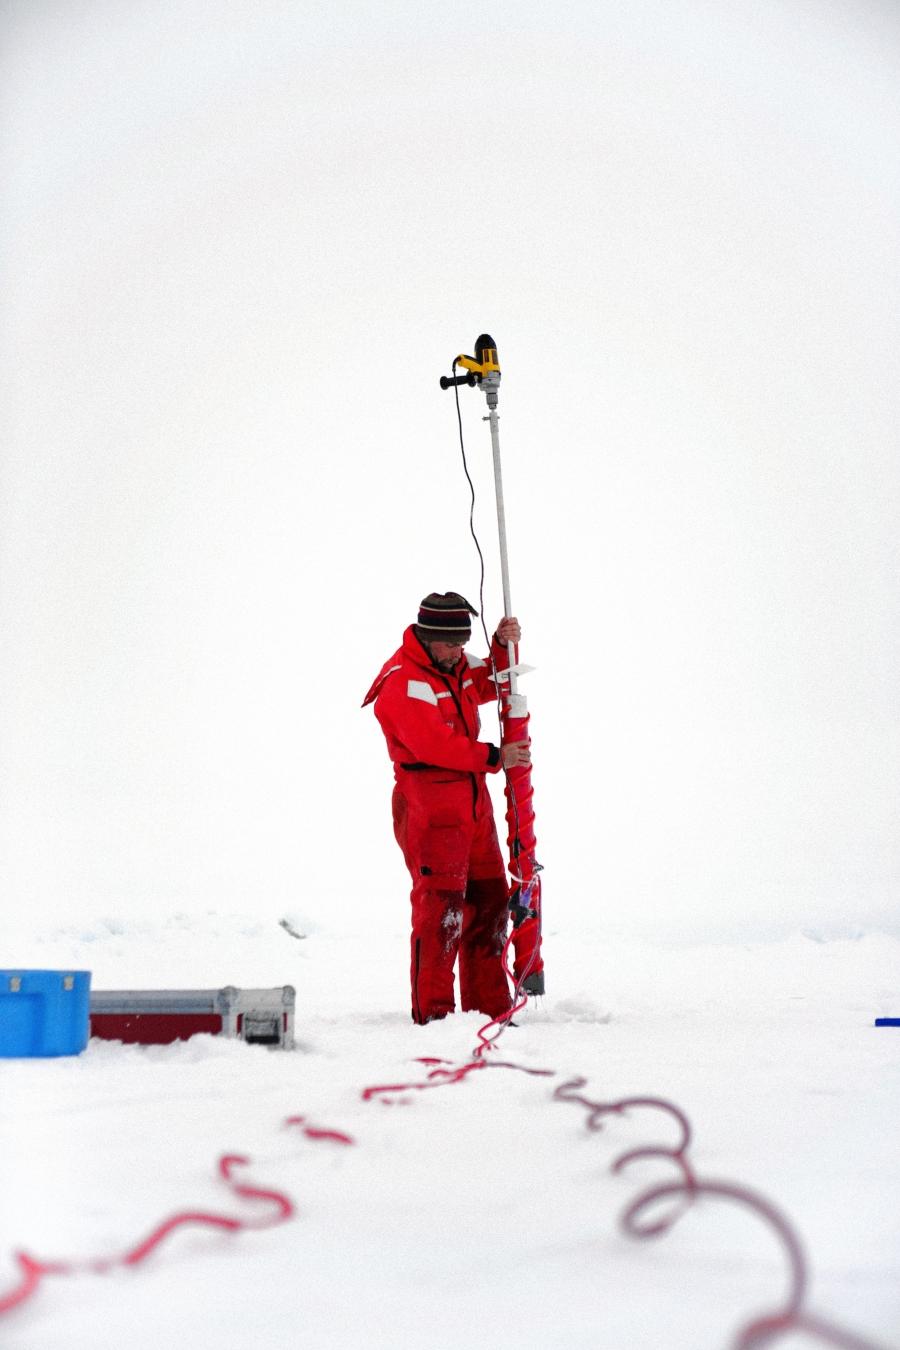 Chris Polashenski uses an electric drill to core out a sample of sea ice. He uses the cores to investigate the tiny cracks in the ice that may or may not allow water to drain from melt ponds